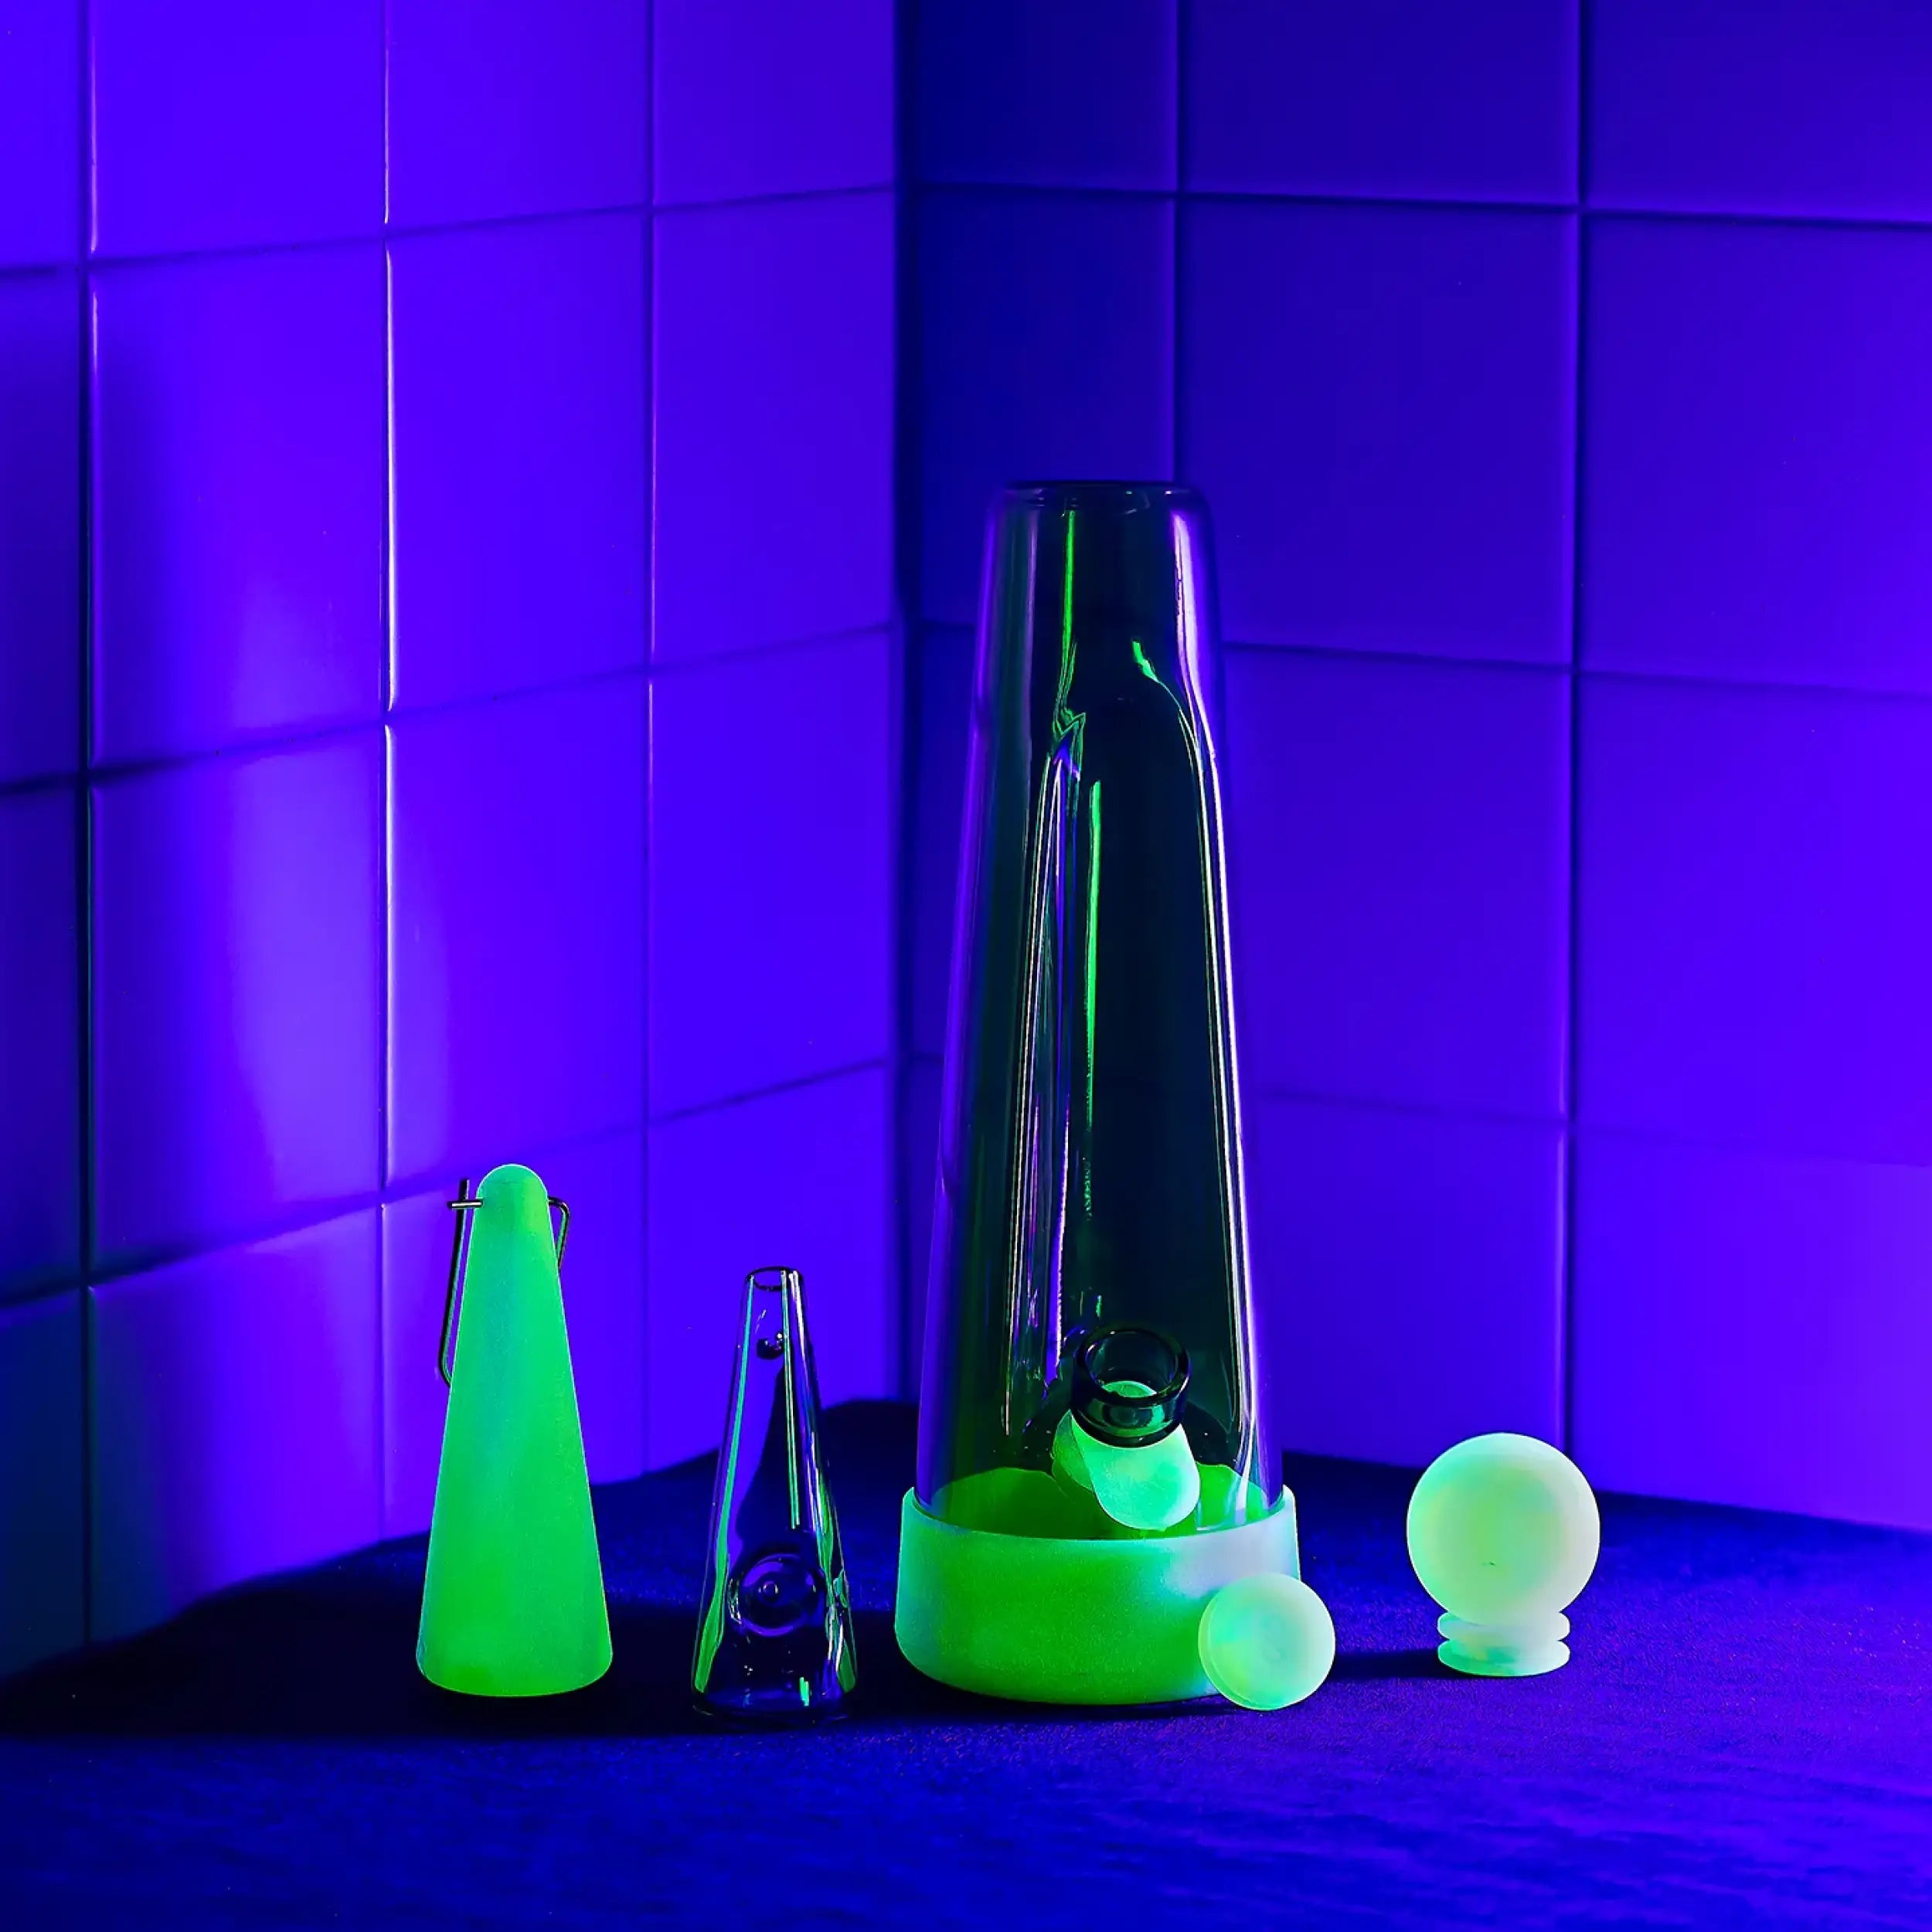 a glow-in-the-dark glass bong and pipe with silicone sleeve in collaboration with session goods x weedfeed.